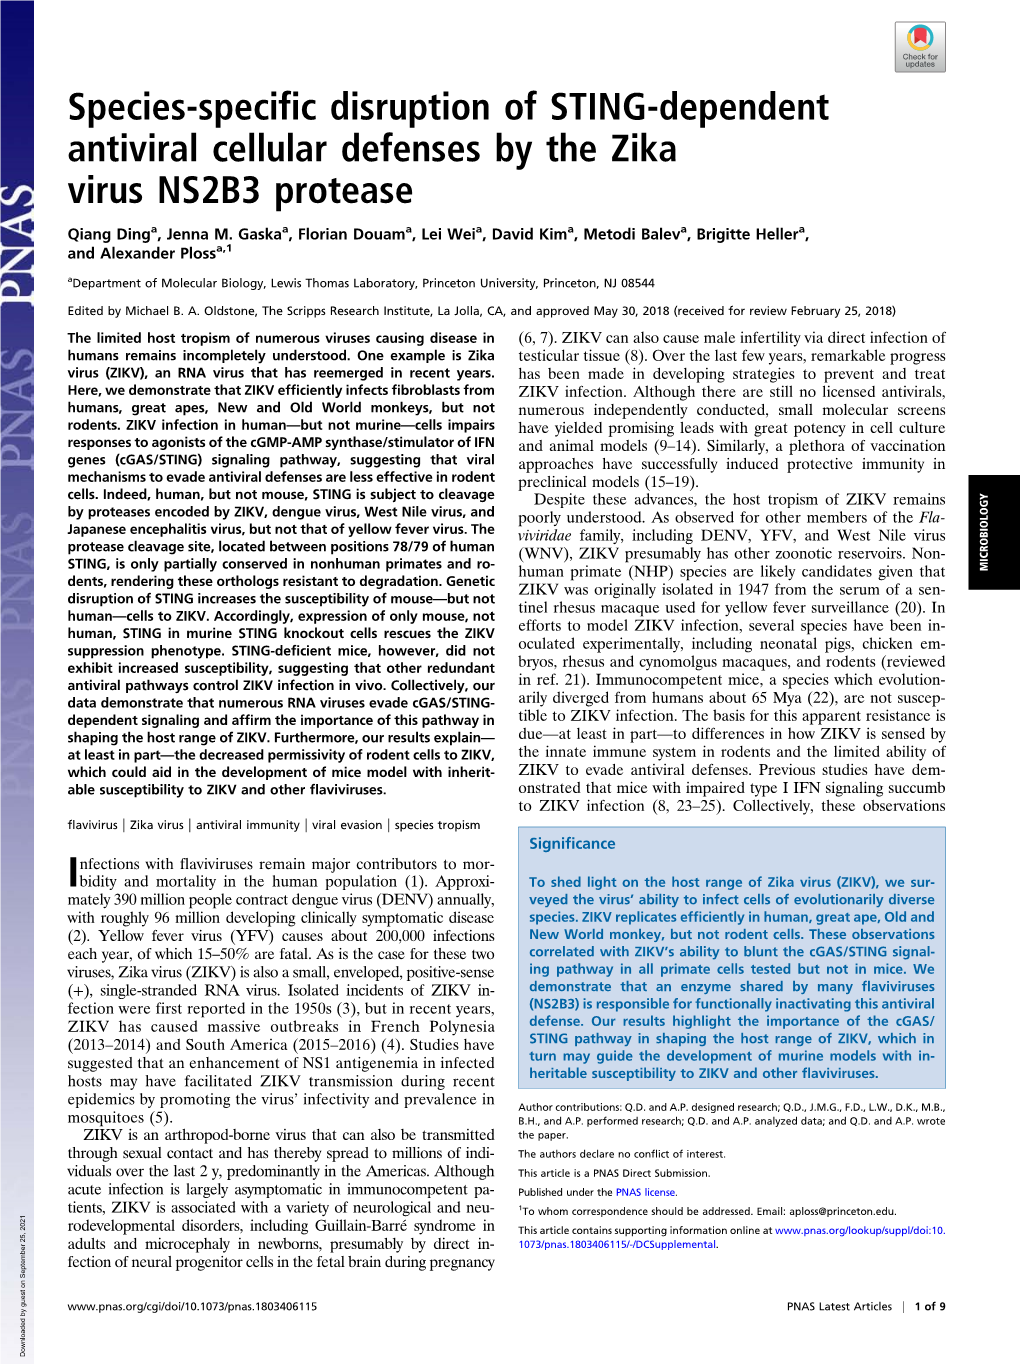 Species-Specific Disruption of STING-Dependent Antiviral Cellular Defenses by the Zika Virus NS2B3 Protease